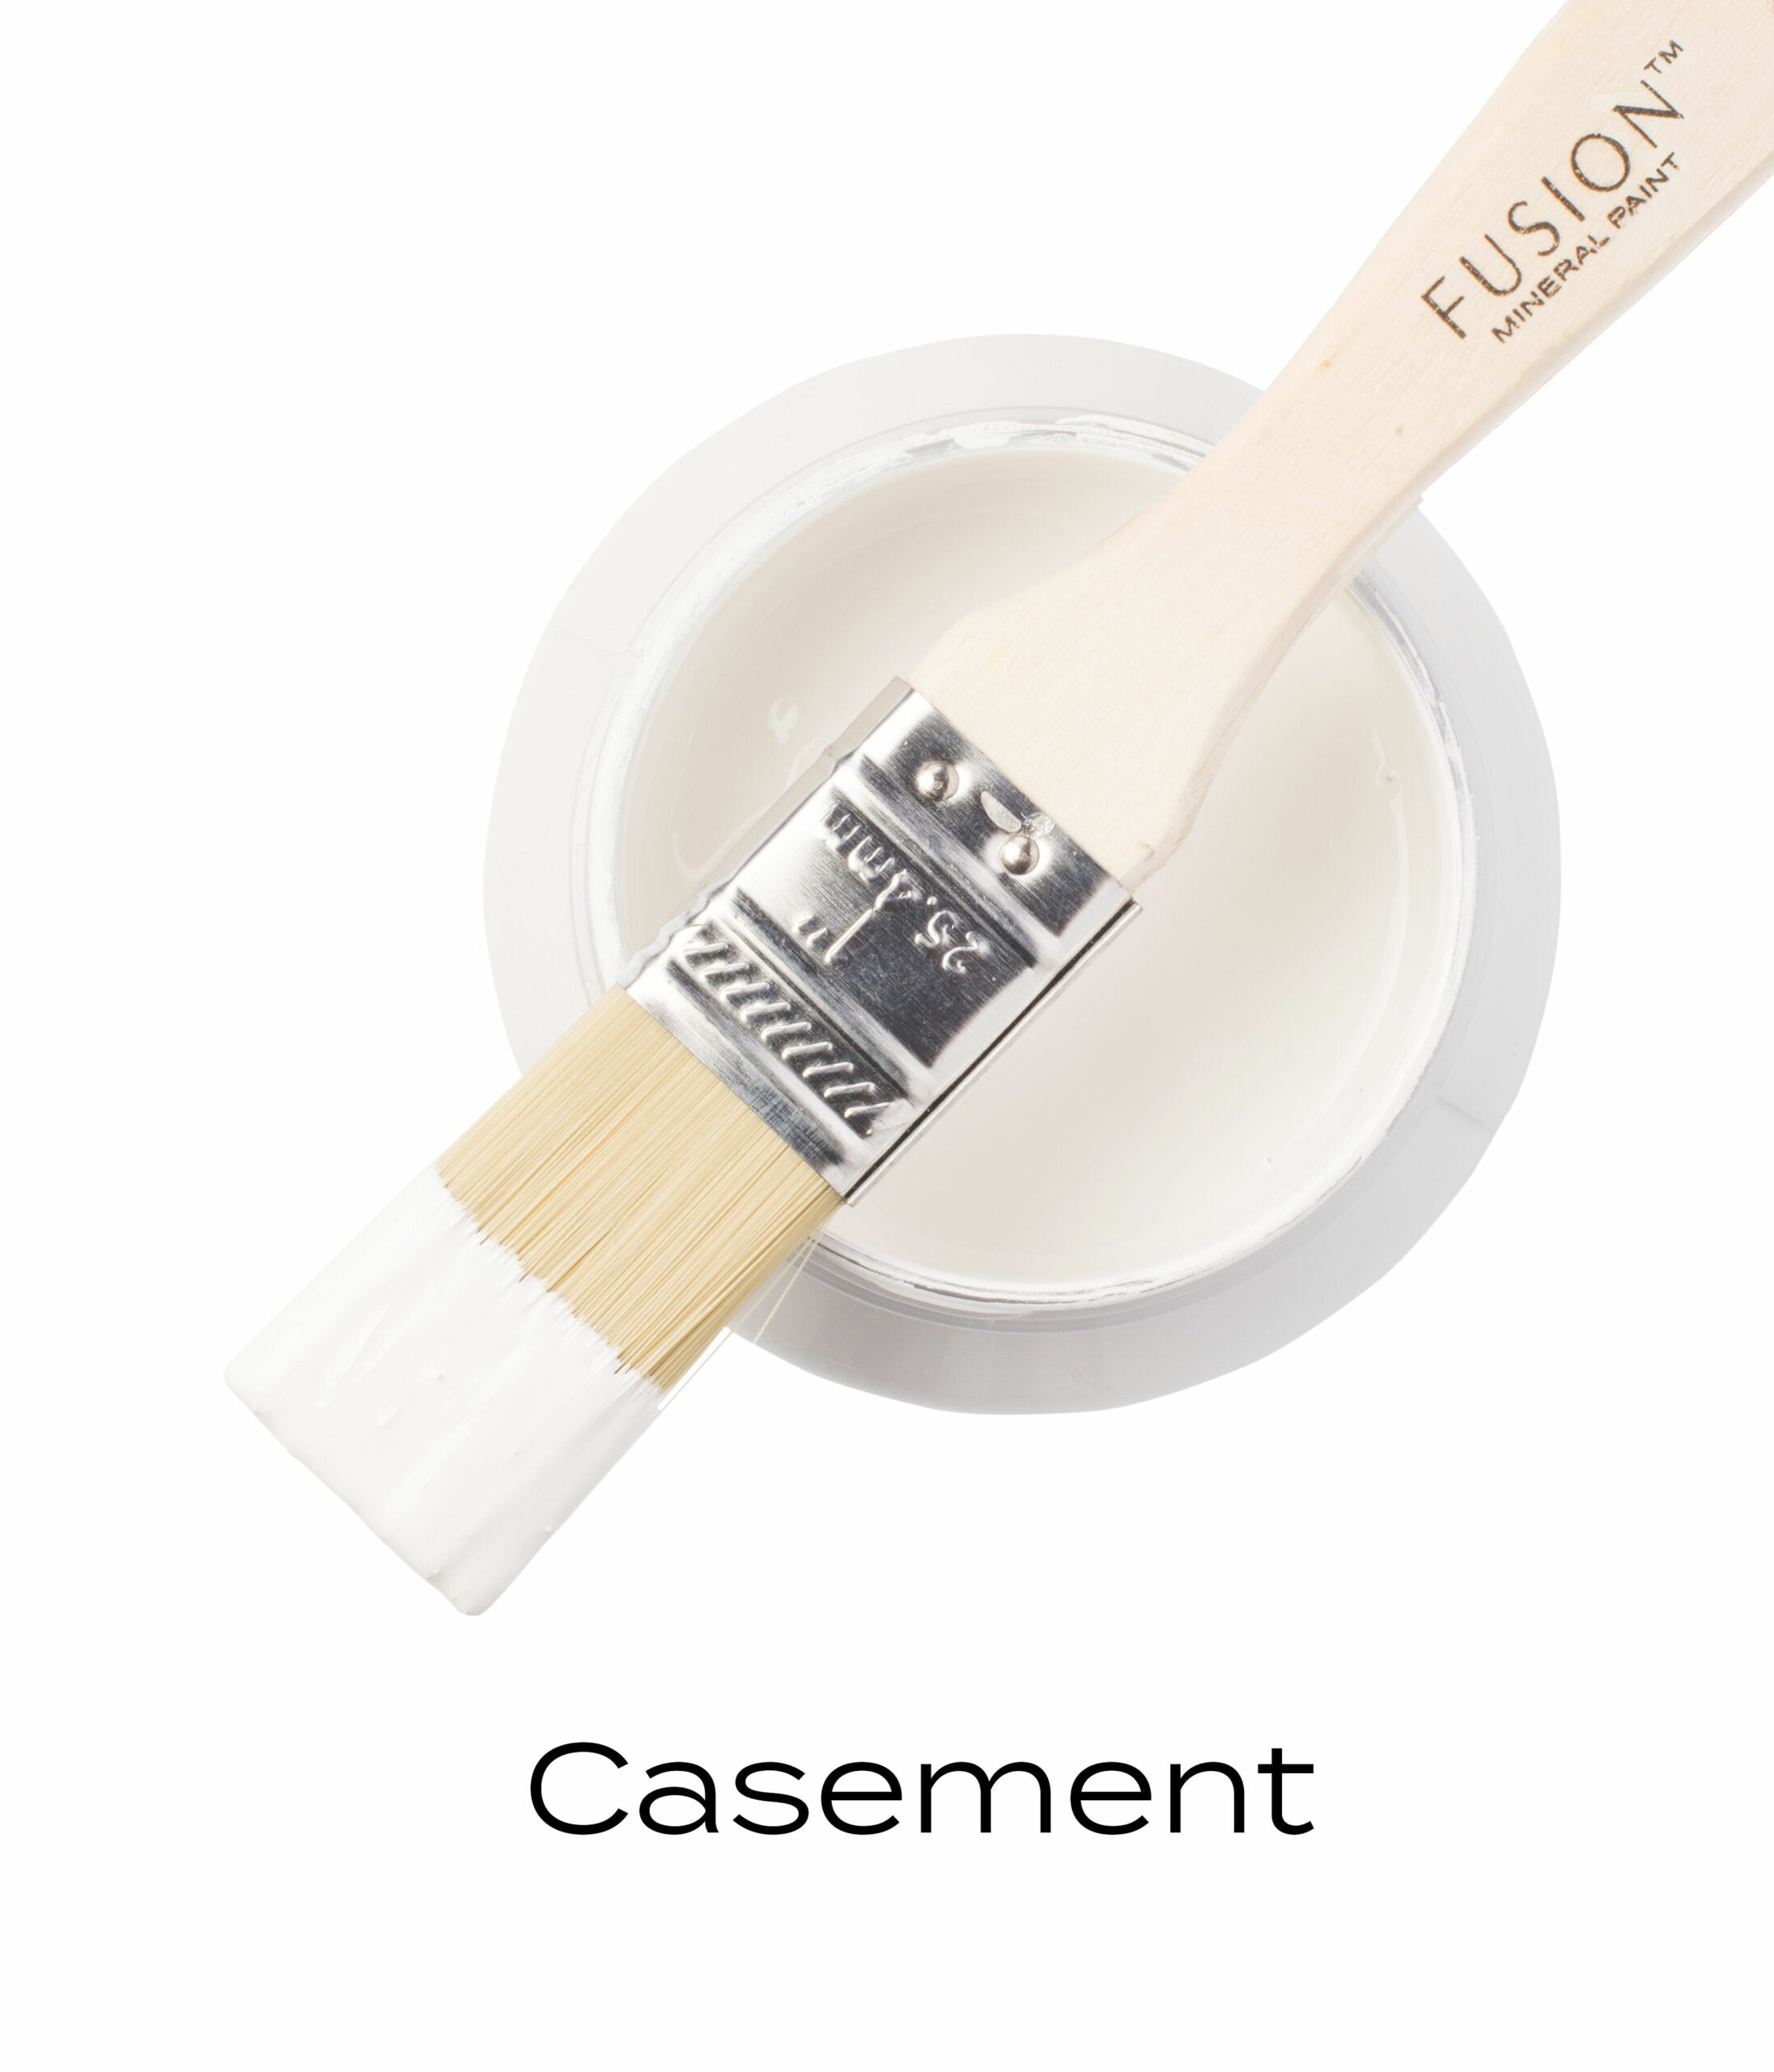 Fusion Mineral Paint Casement pint and brush